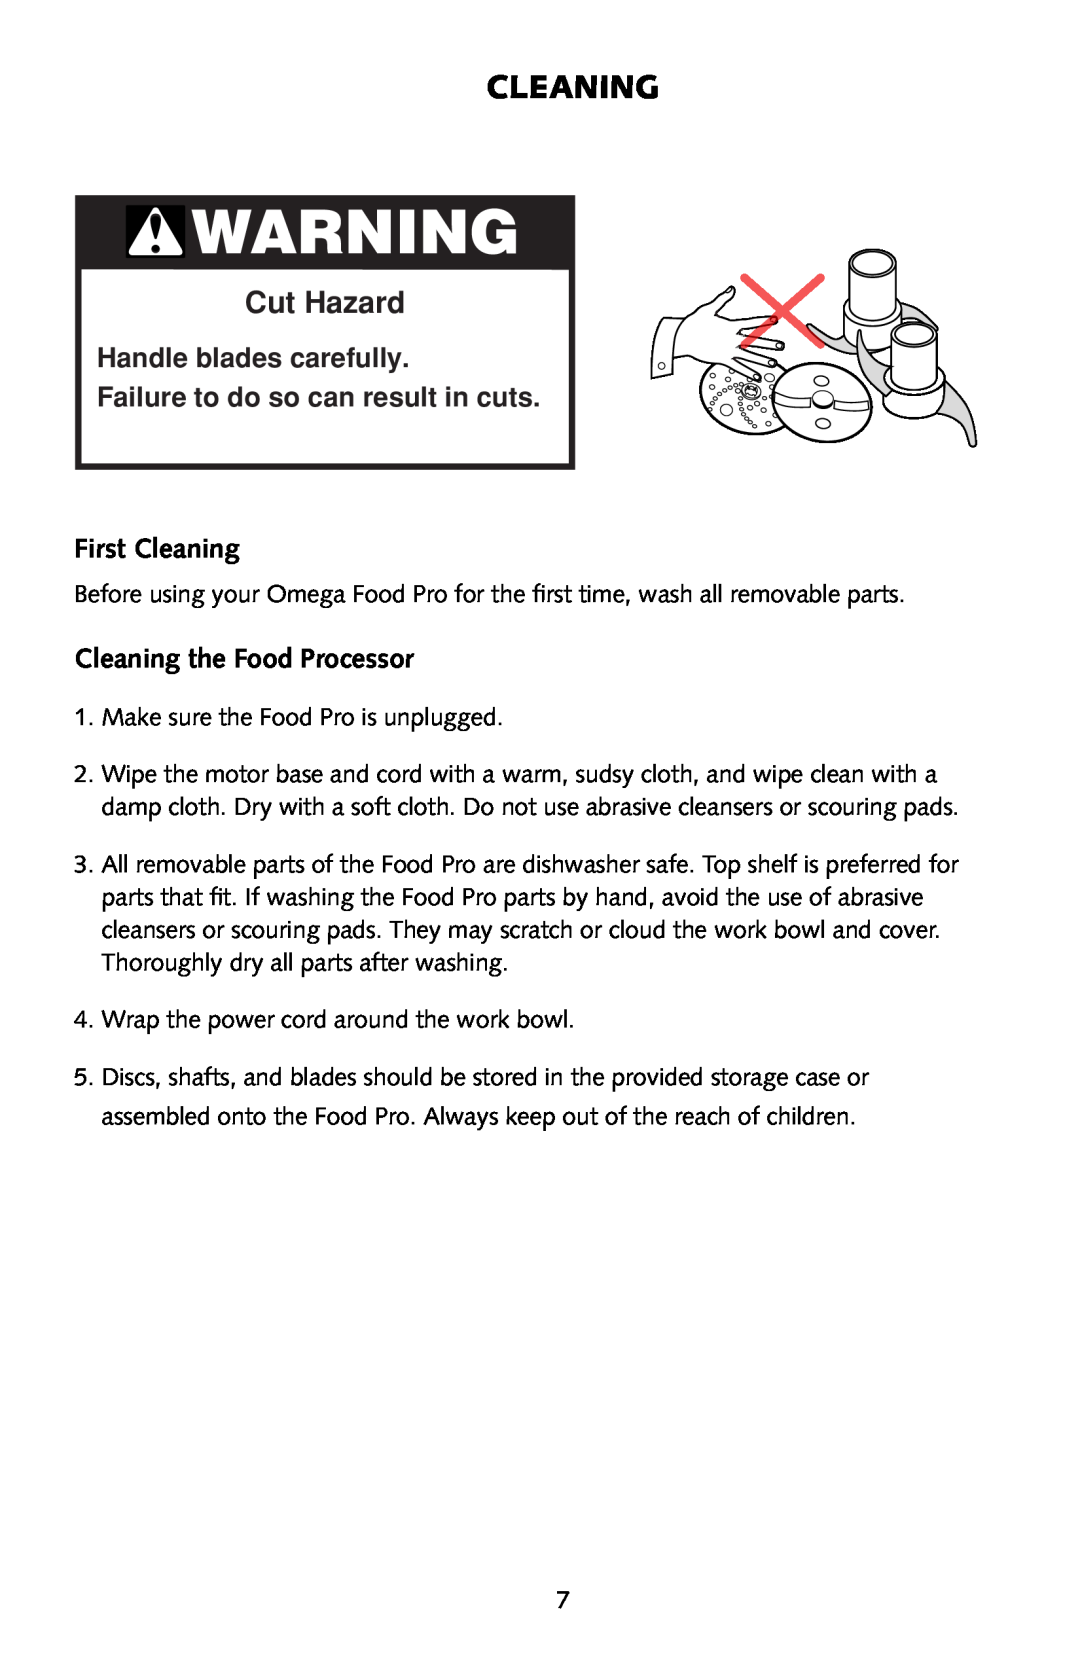 Omega FoodPro instruction manual First Cleaning, Cleaning the Food Processor, Cut Hazard 